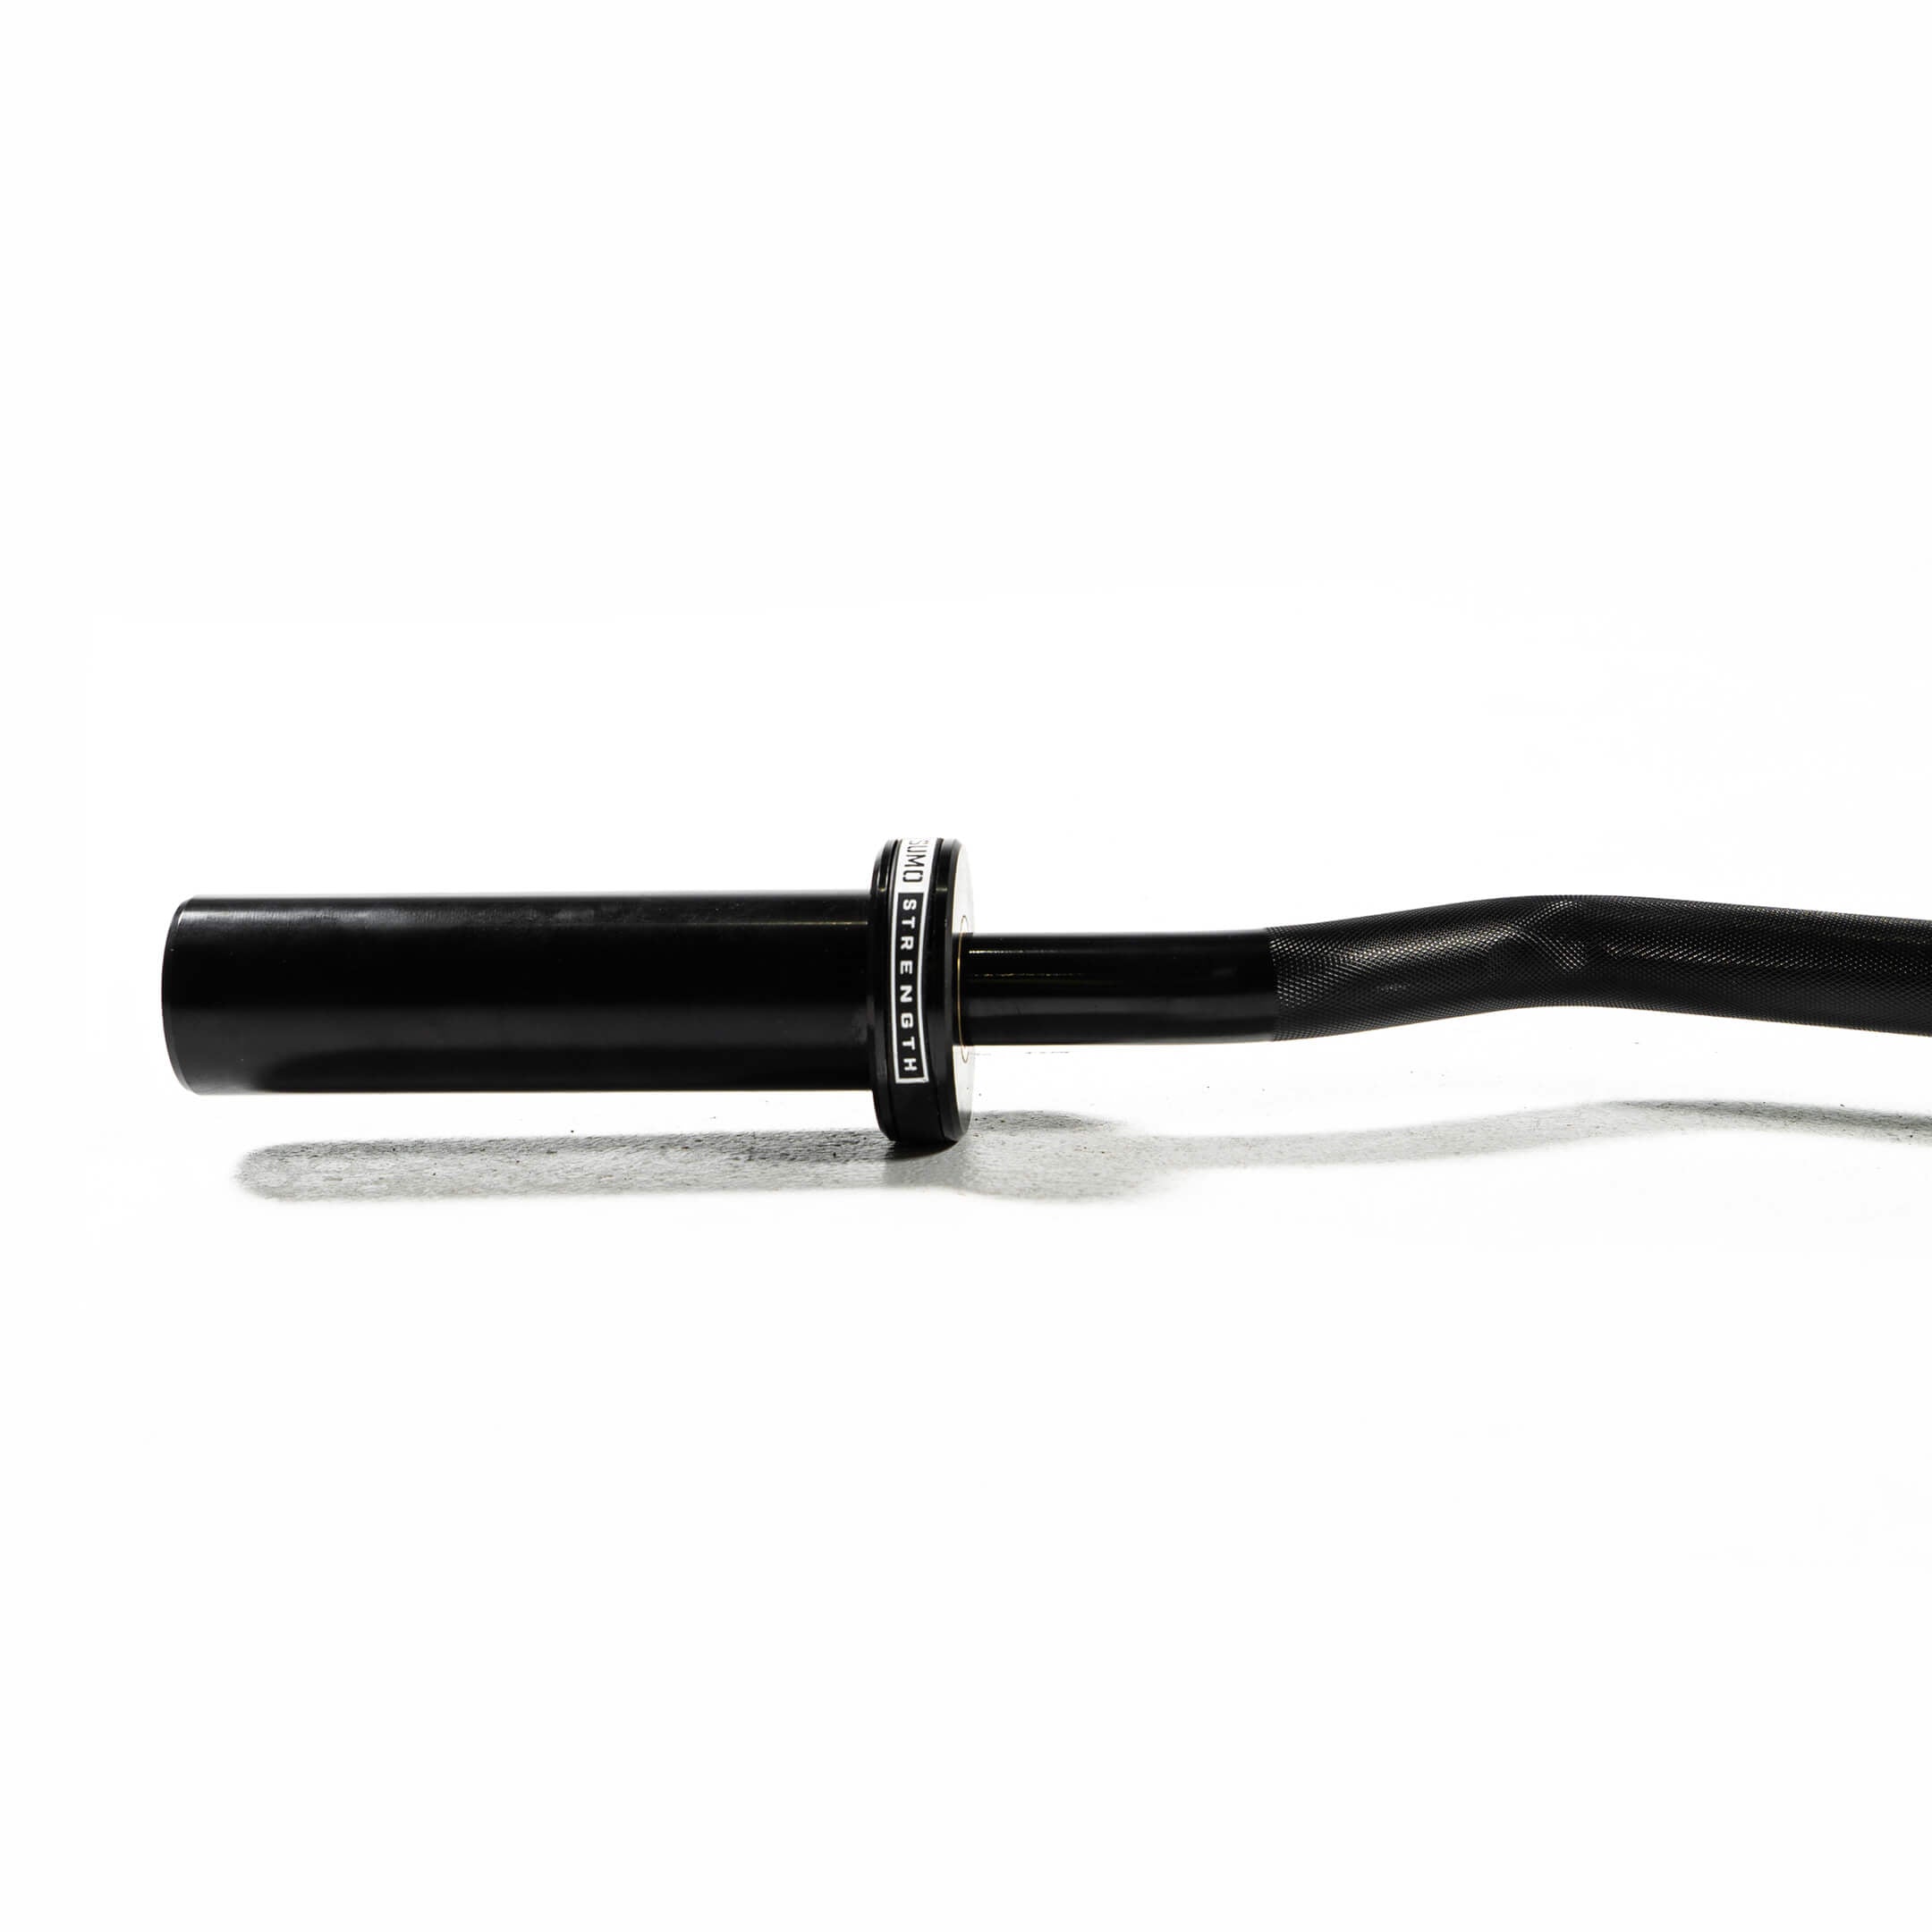 Olympic Curl Barbell - Black (sleeve)